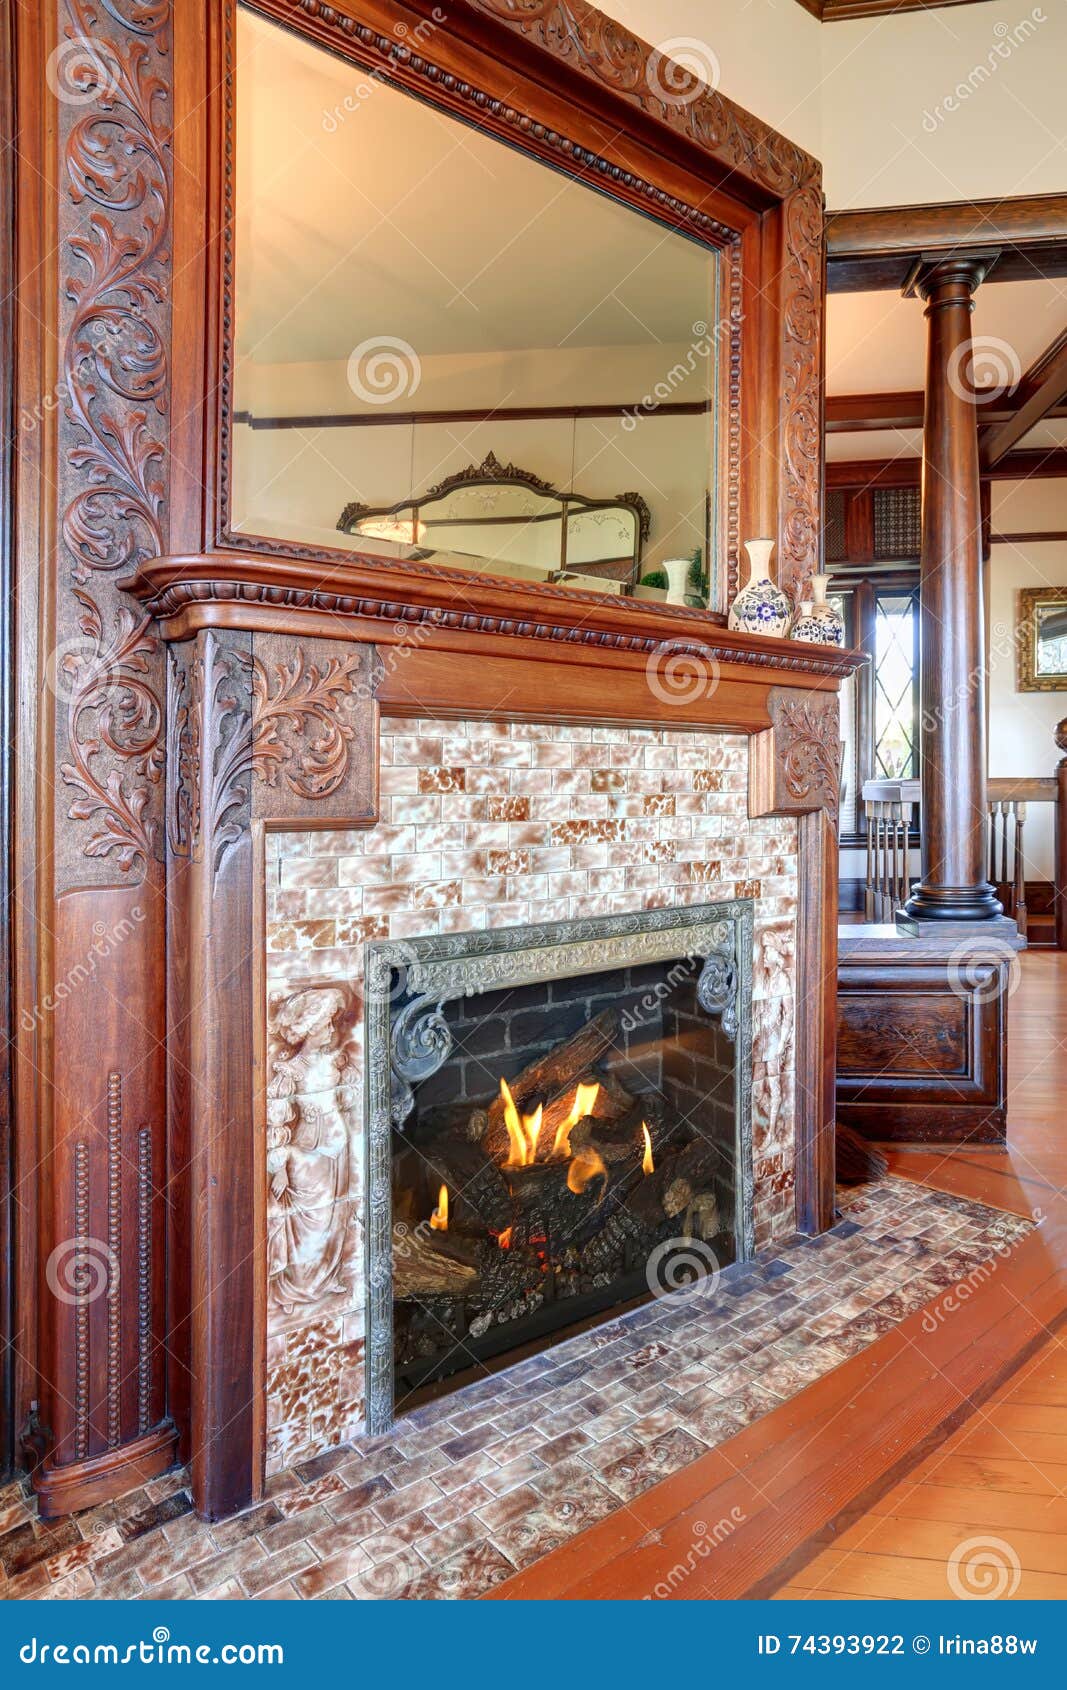 Clouse Up View Of Antique Fireplace With Decorative Tile Trim